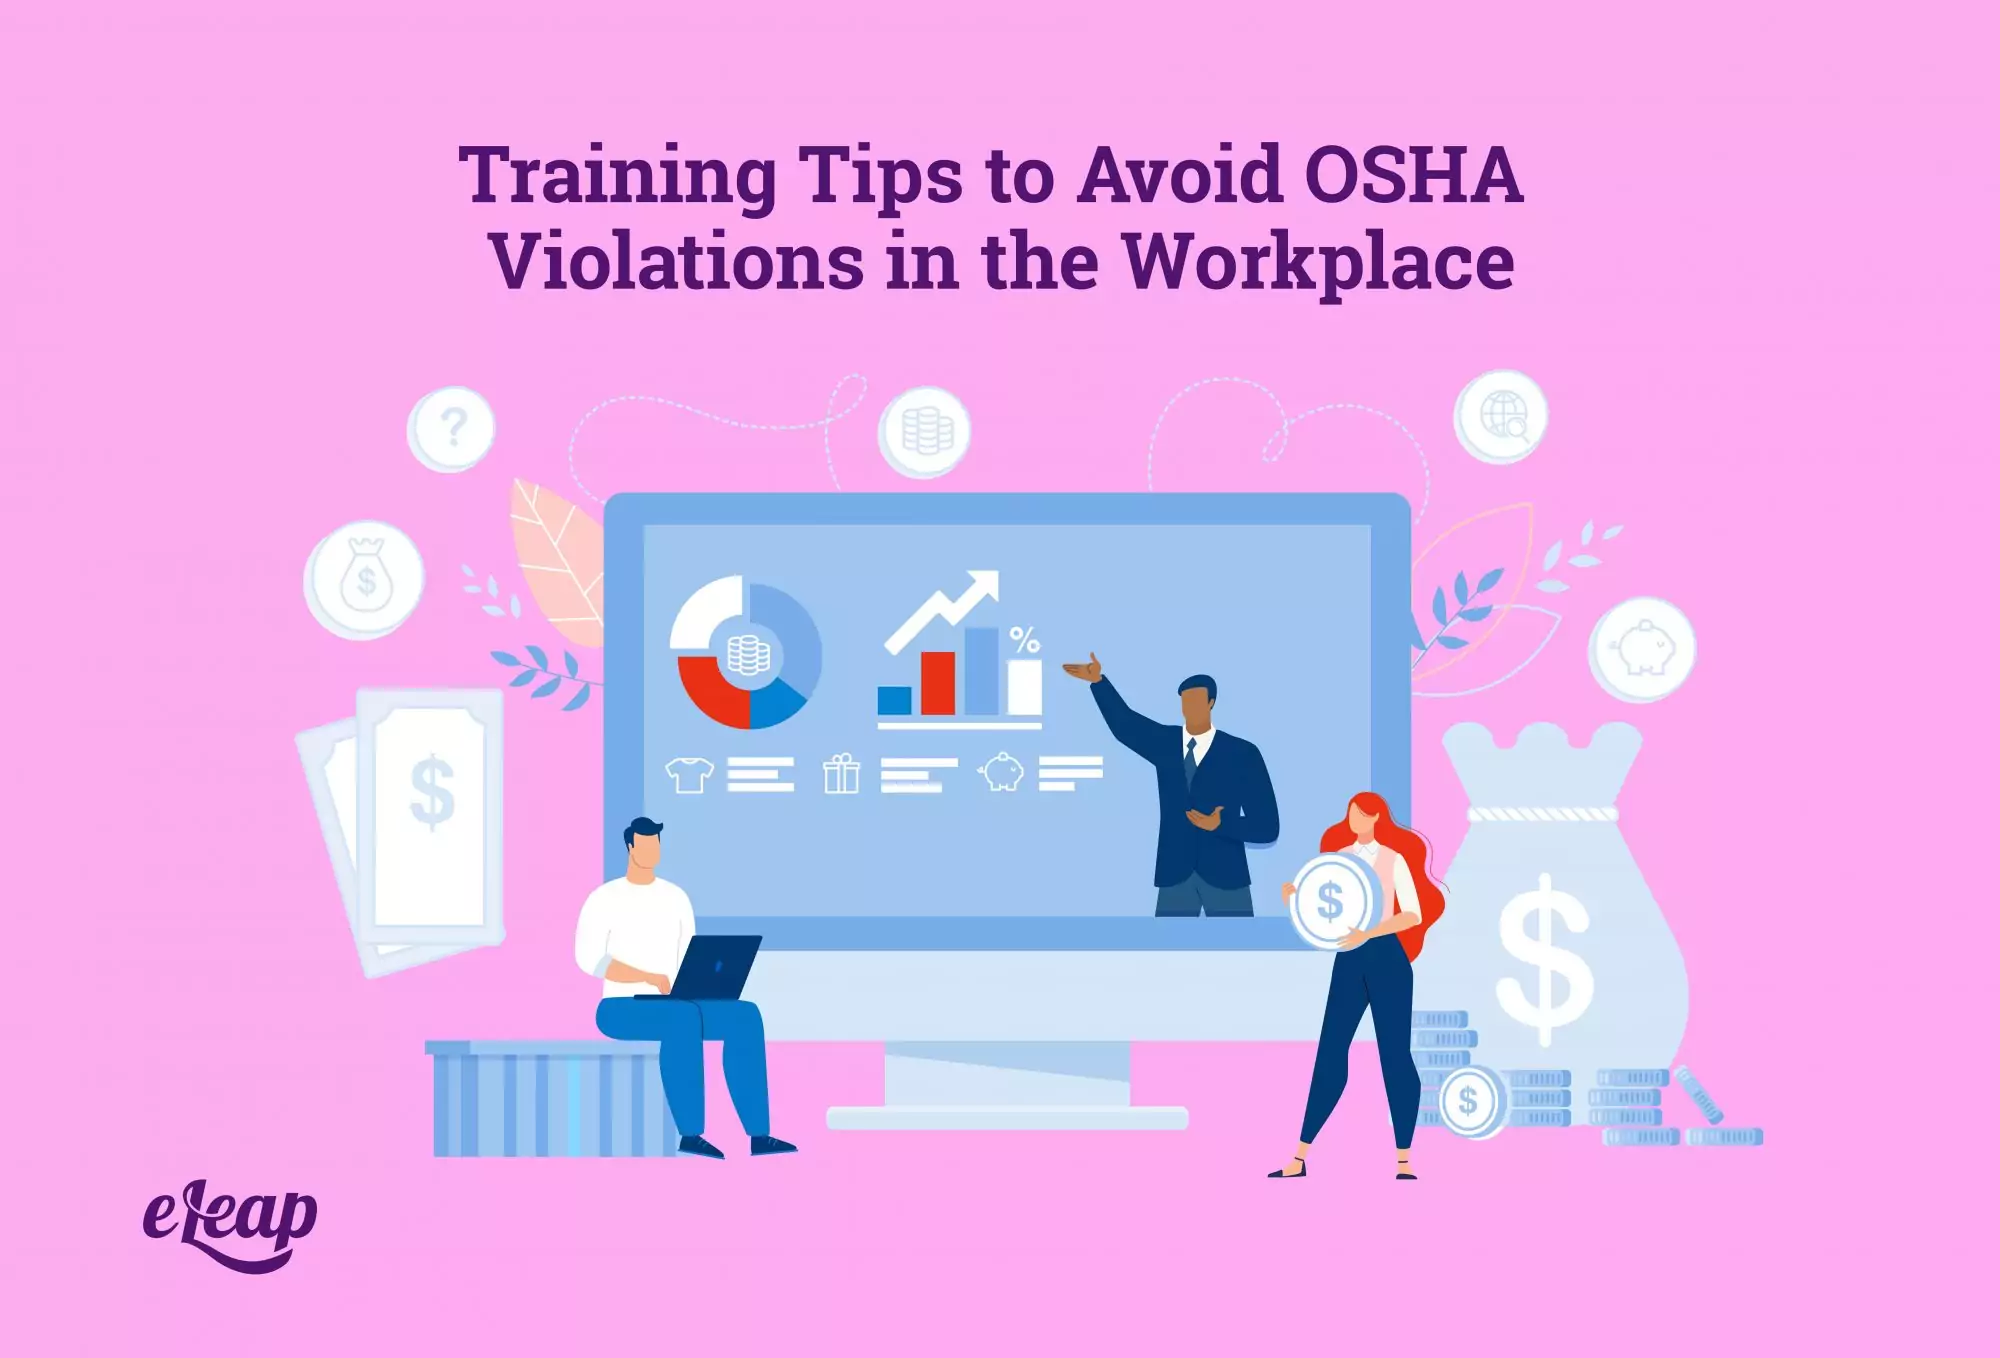 Training Tips to Avoid OSHA Violations in the Workplace